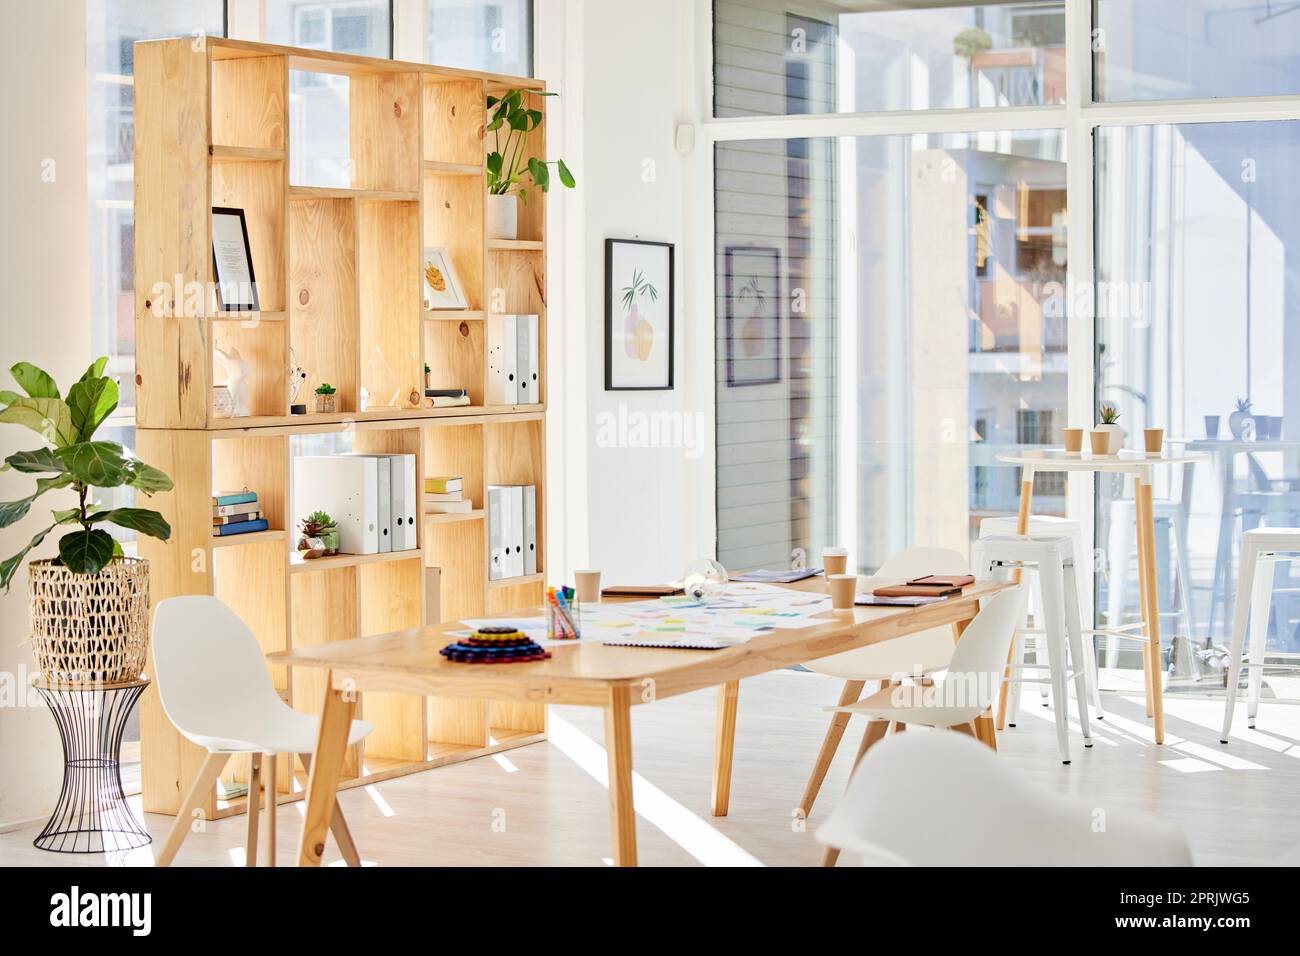 Aesthetic interior of home office interior with design chair, wooden desk,  plants, shelf, office accessories, post cards, photos and decoration.  Minimalist home decor. Template. Photos